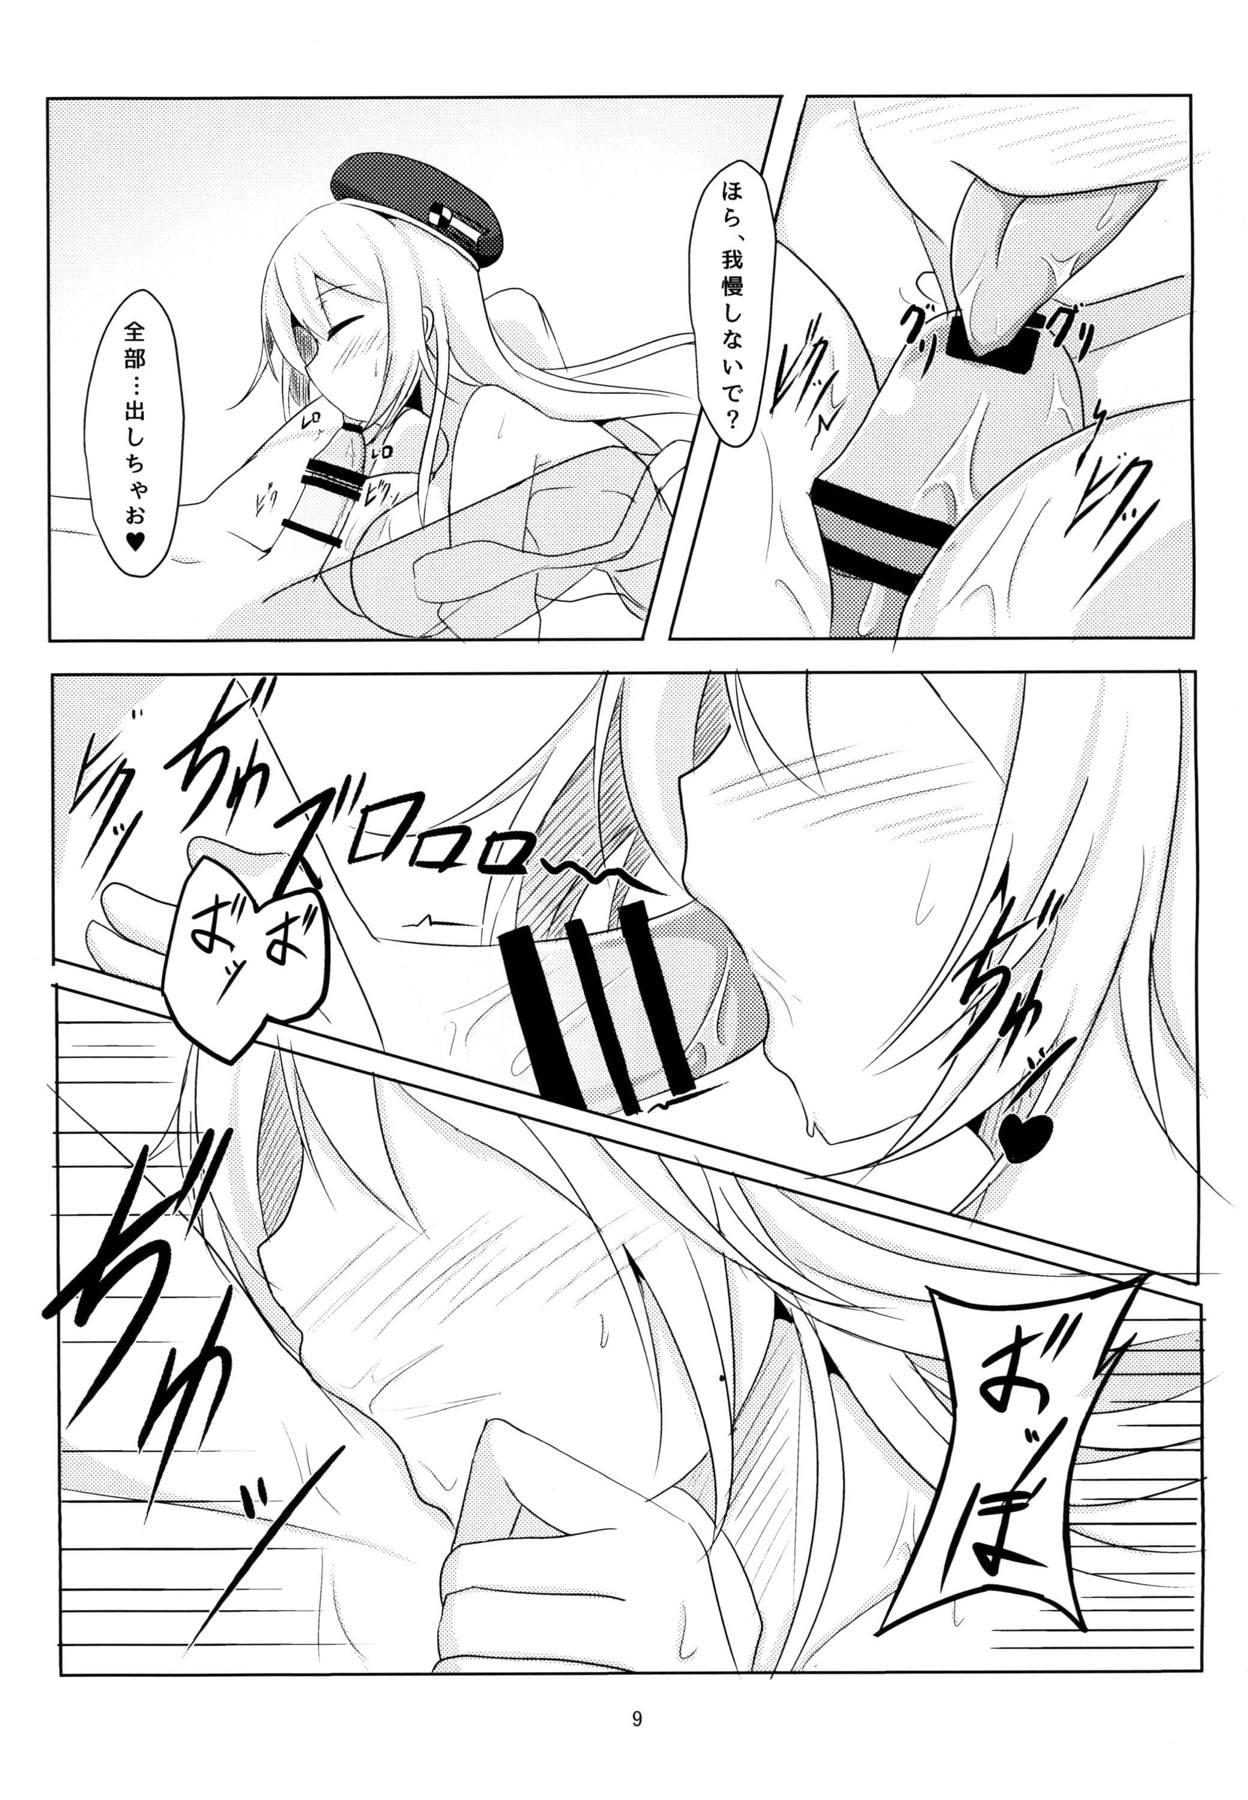 Funny Rest 5 - Kantai collection Sola - Page 8